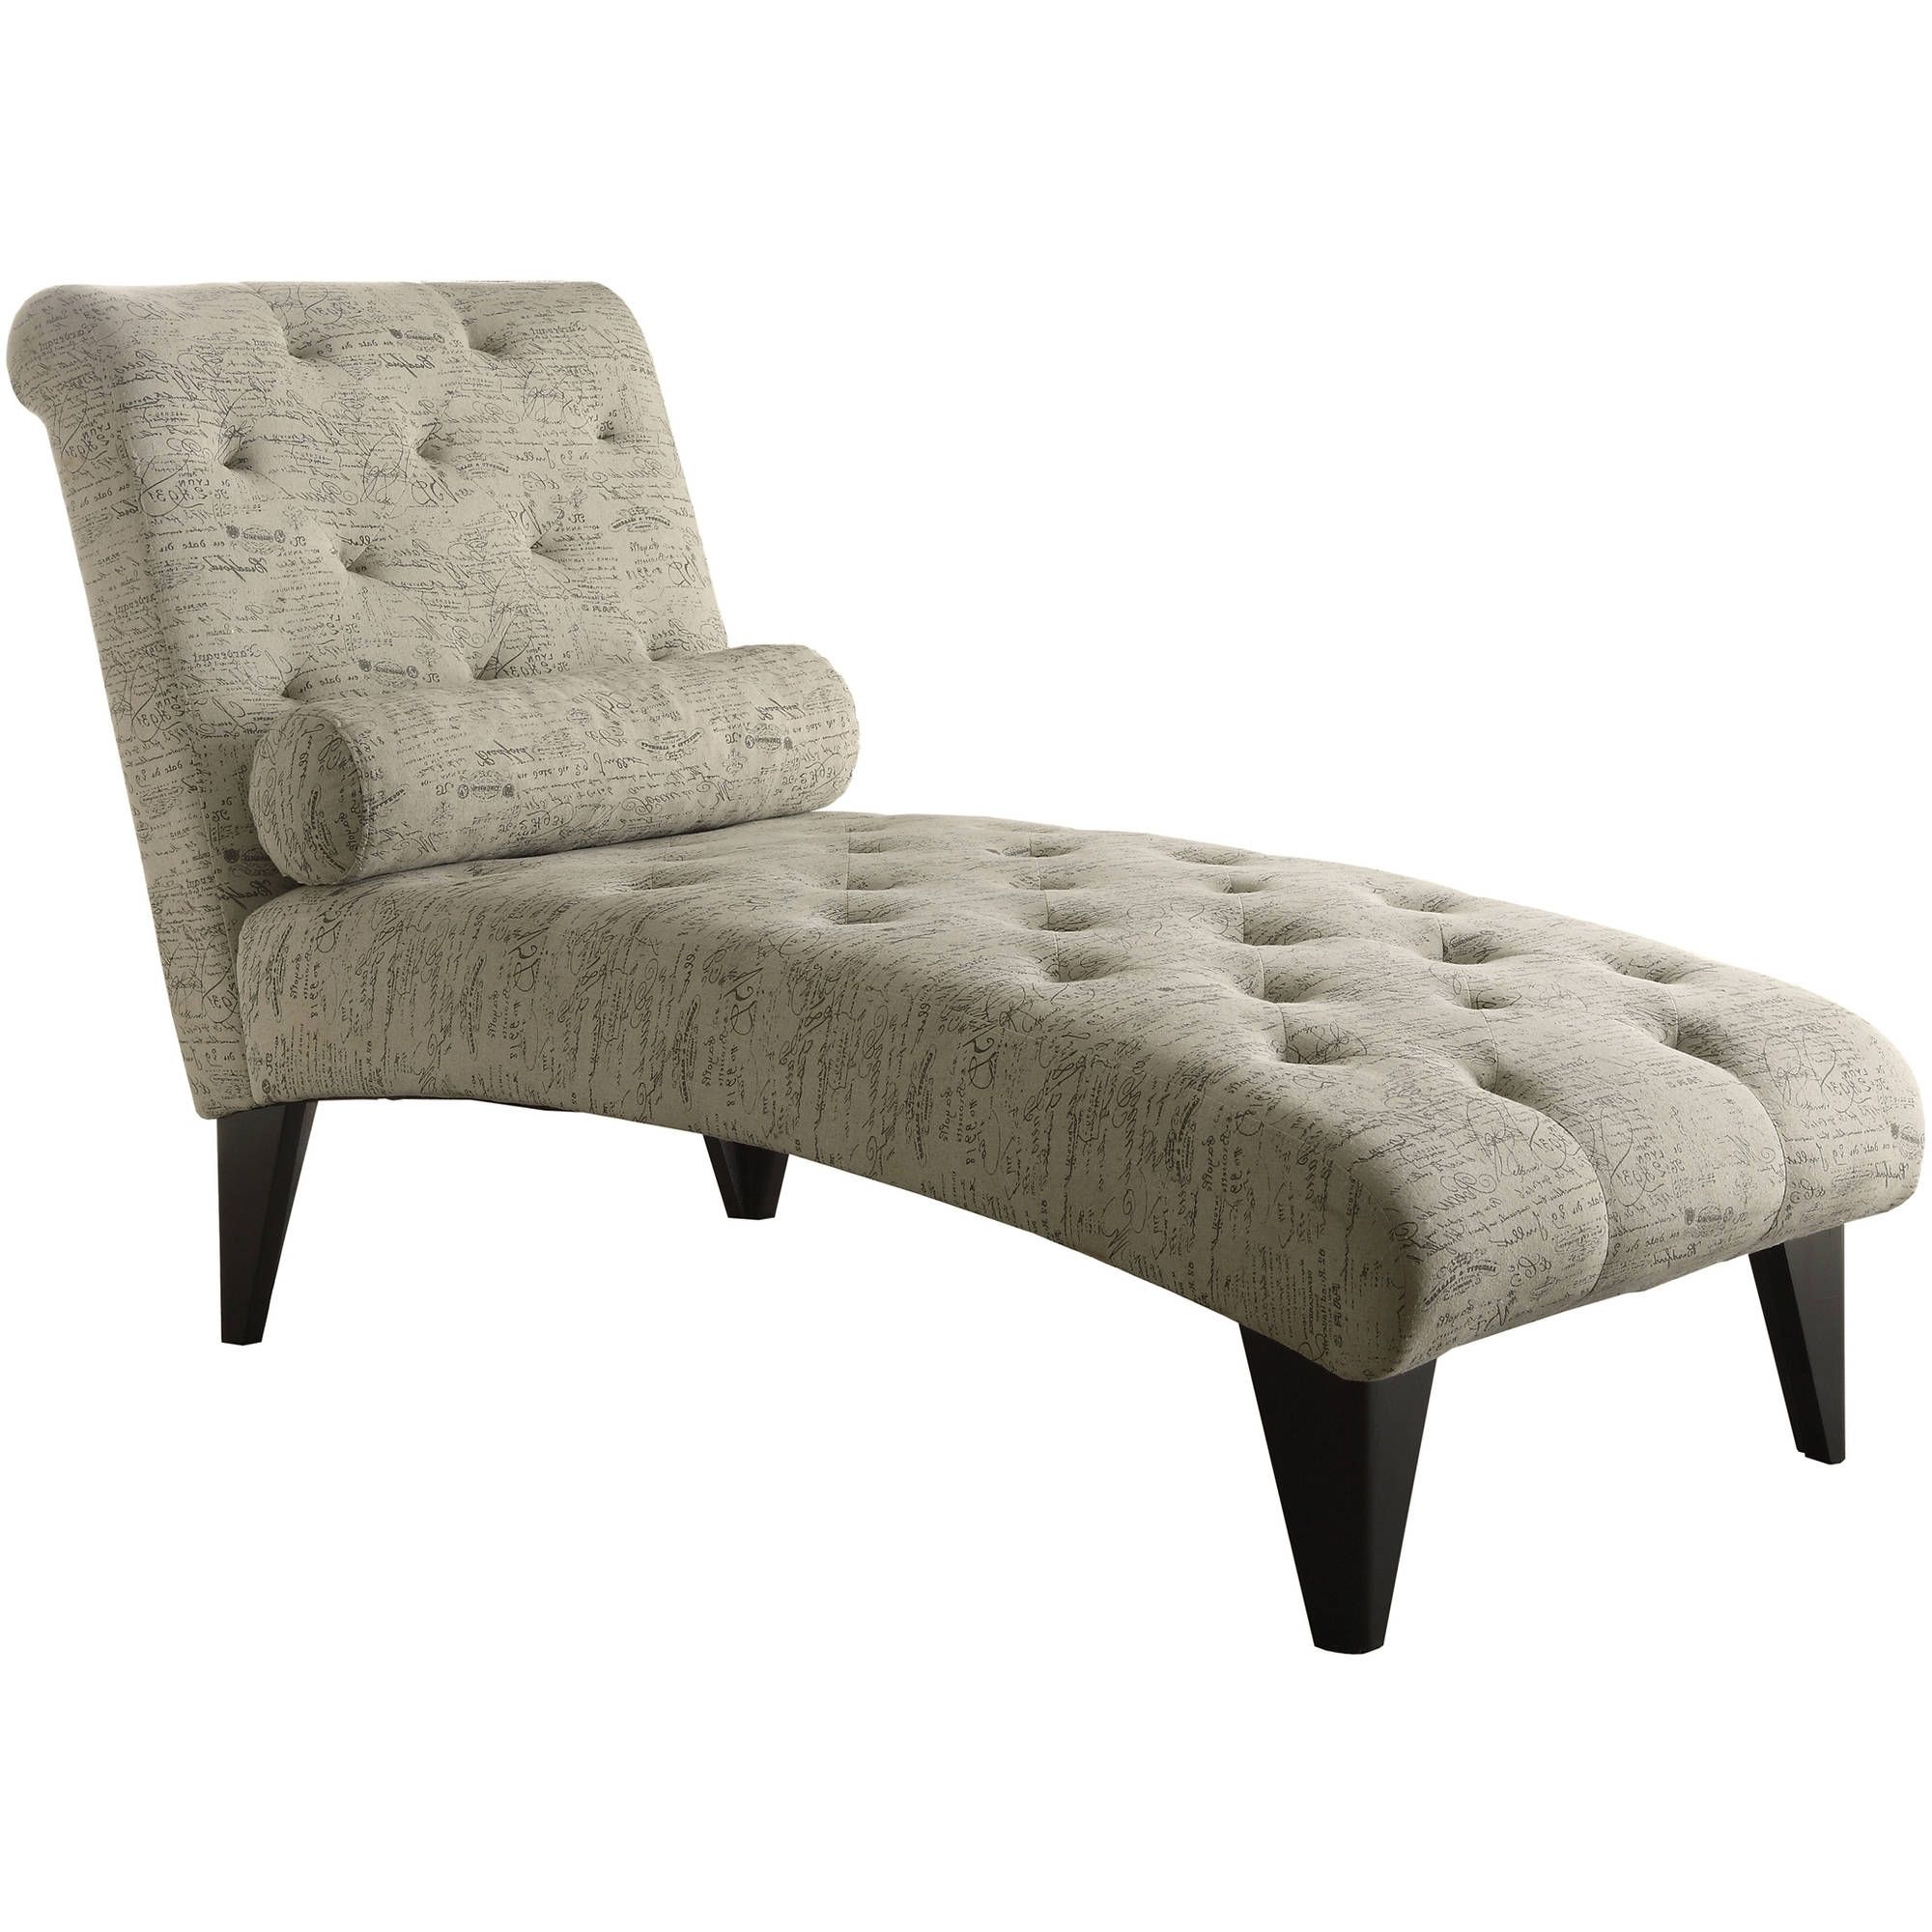 Current Chaise Lounges – Walmart Regarding Lounge Sofas And Chairs (View 5 of 15)